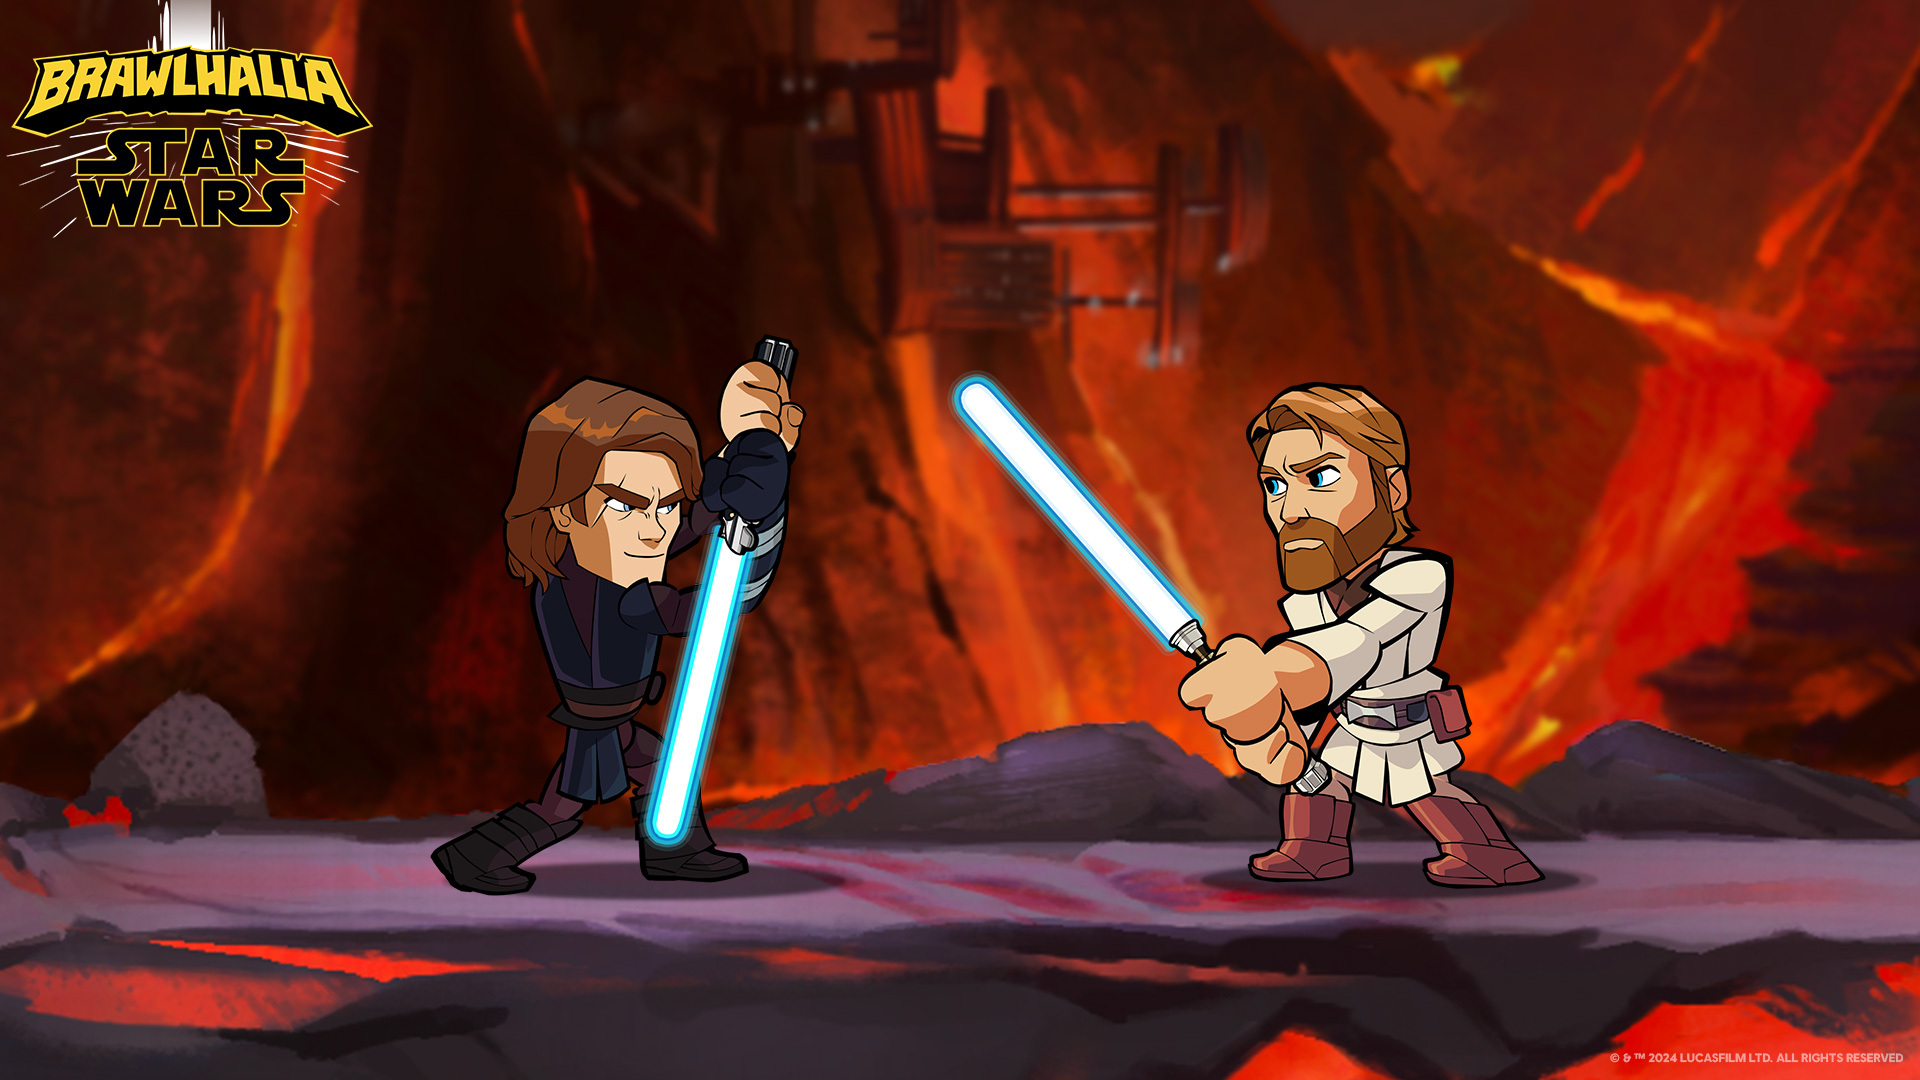 Take the High Ground in Brawl of the Heroes!